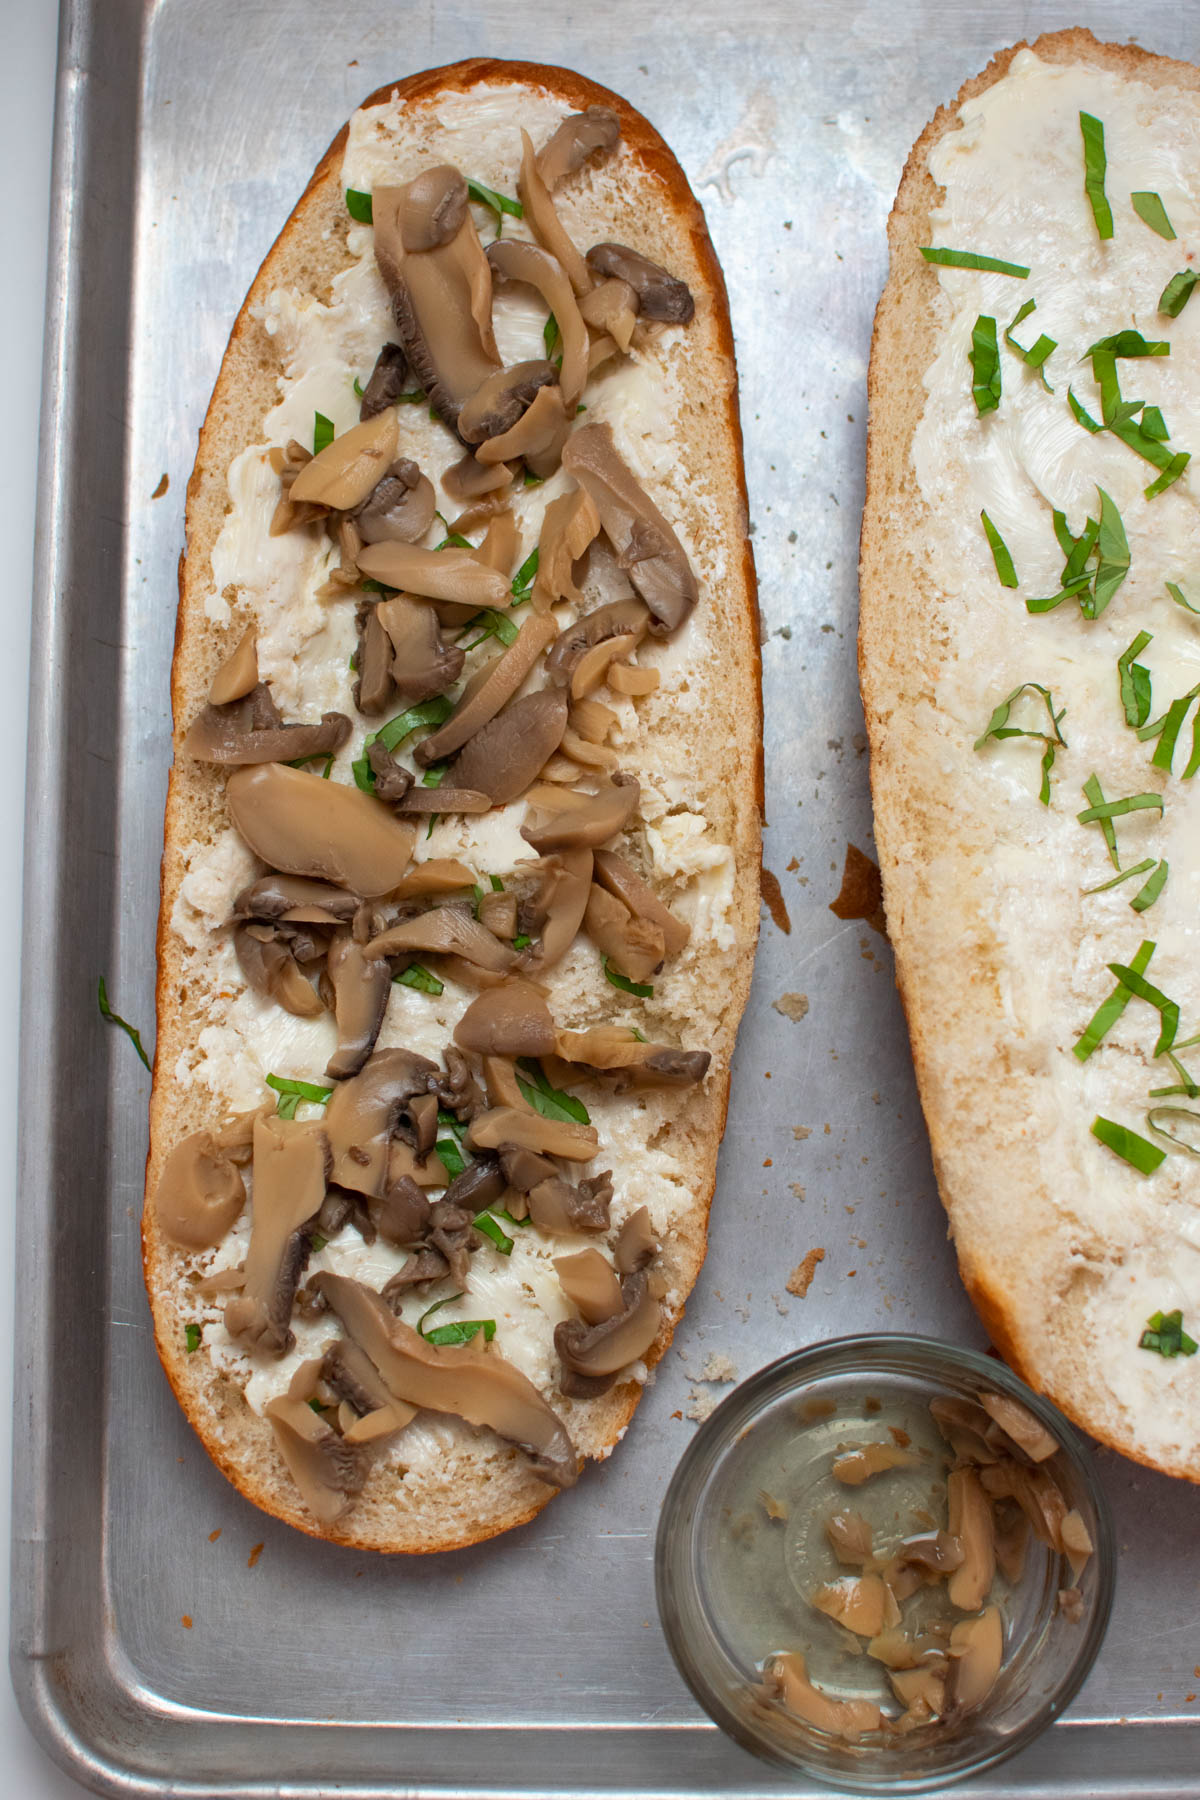 Mushroom pieces on half of French bread all on baking sheet.